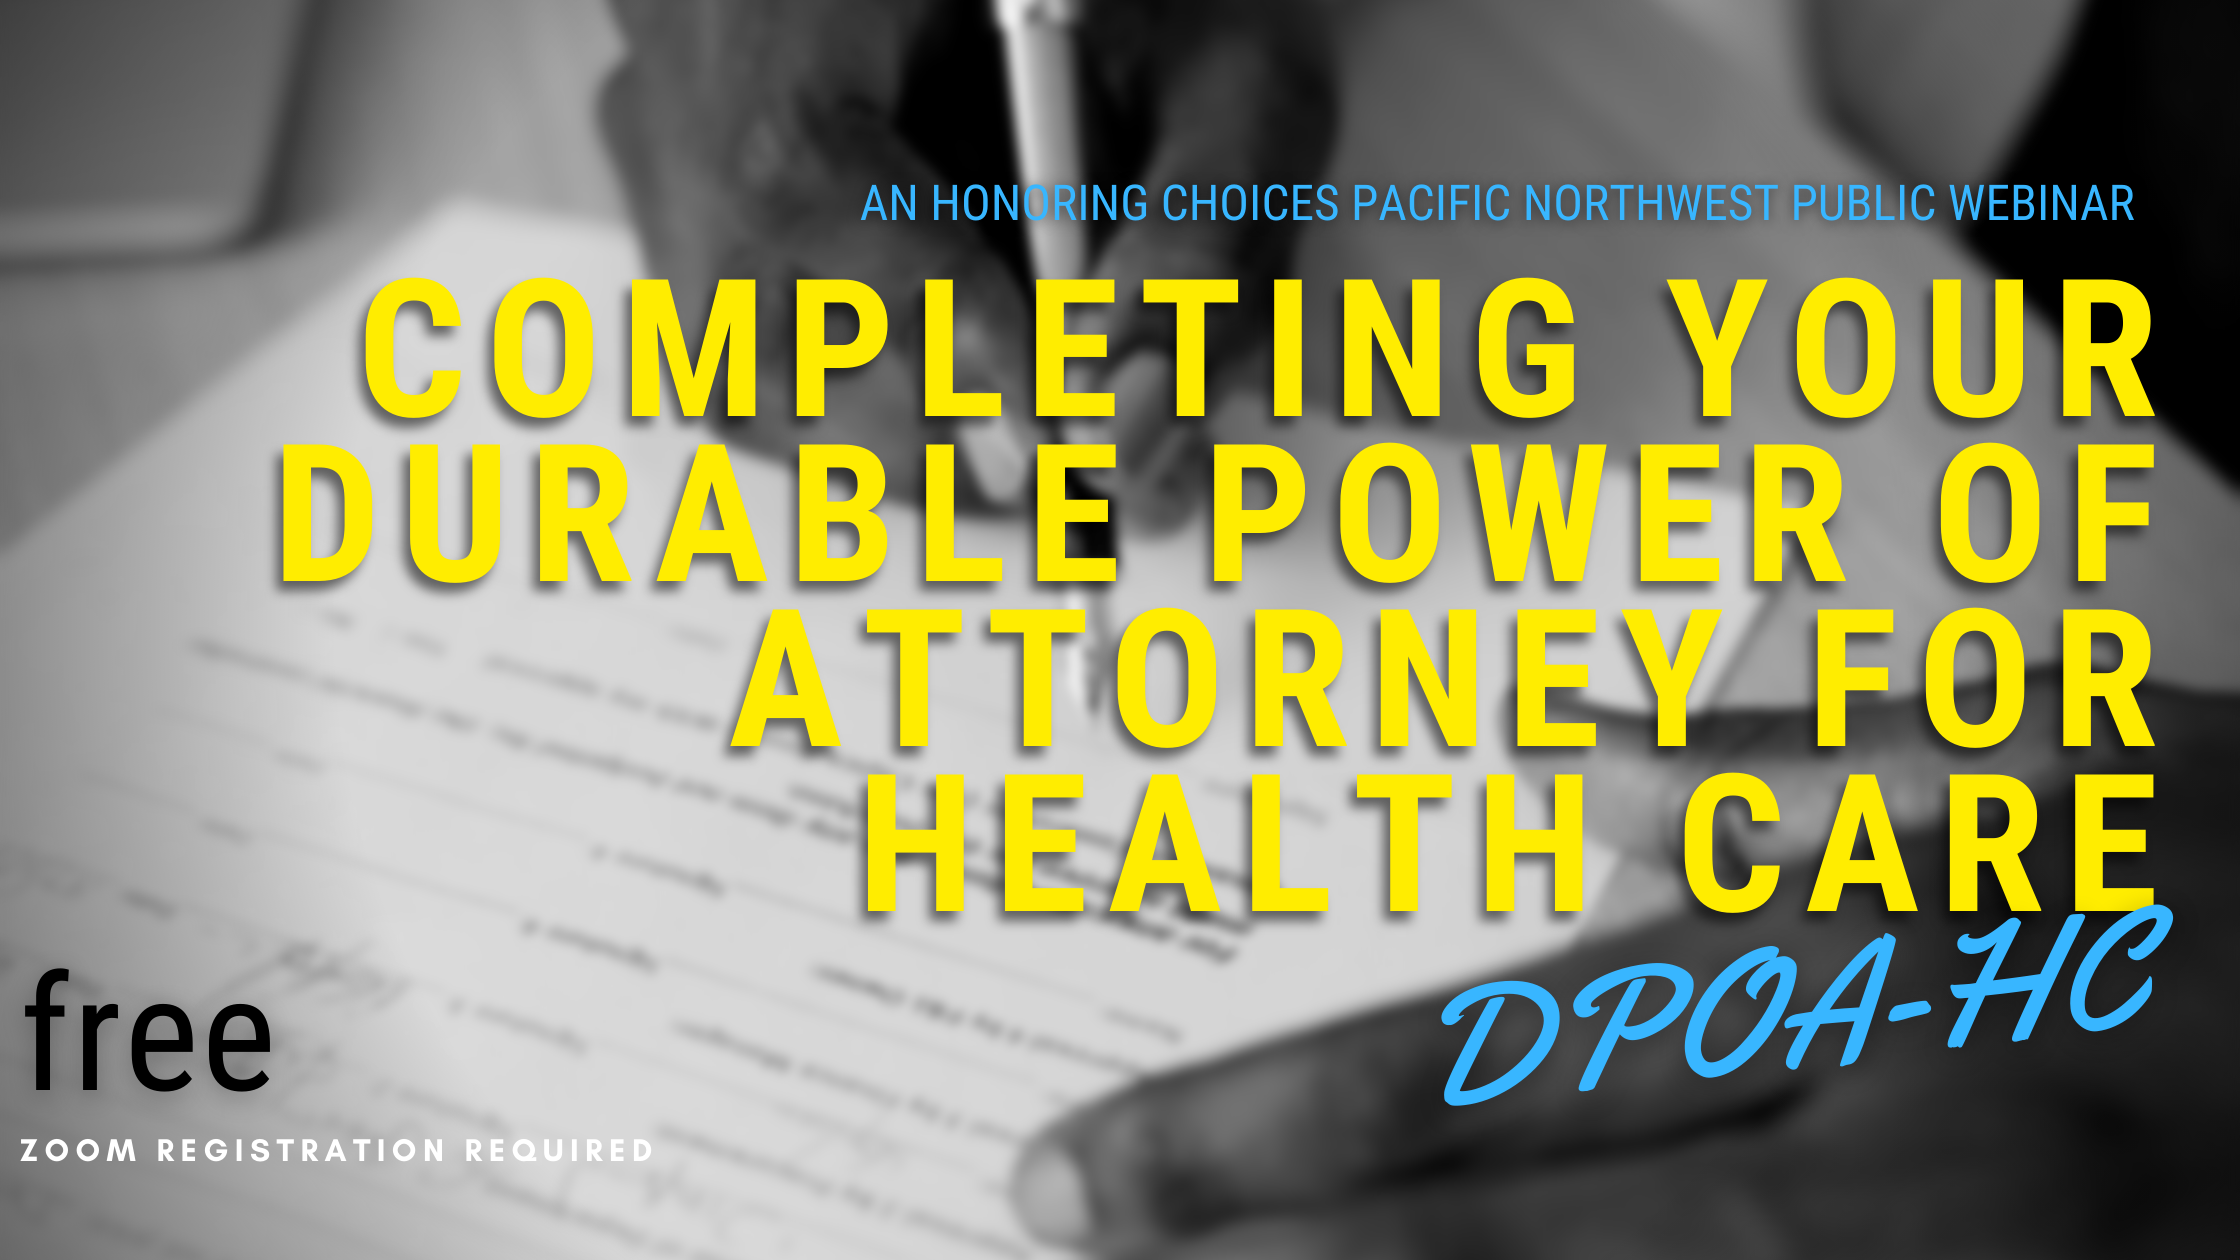 Graphic of hands signing document with text "An Honoring Choices Pacific Northwest Webinar. Completing your Durable Power of Attorney for Healthcare. Free. Zoom registration required"